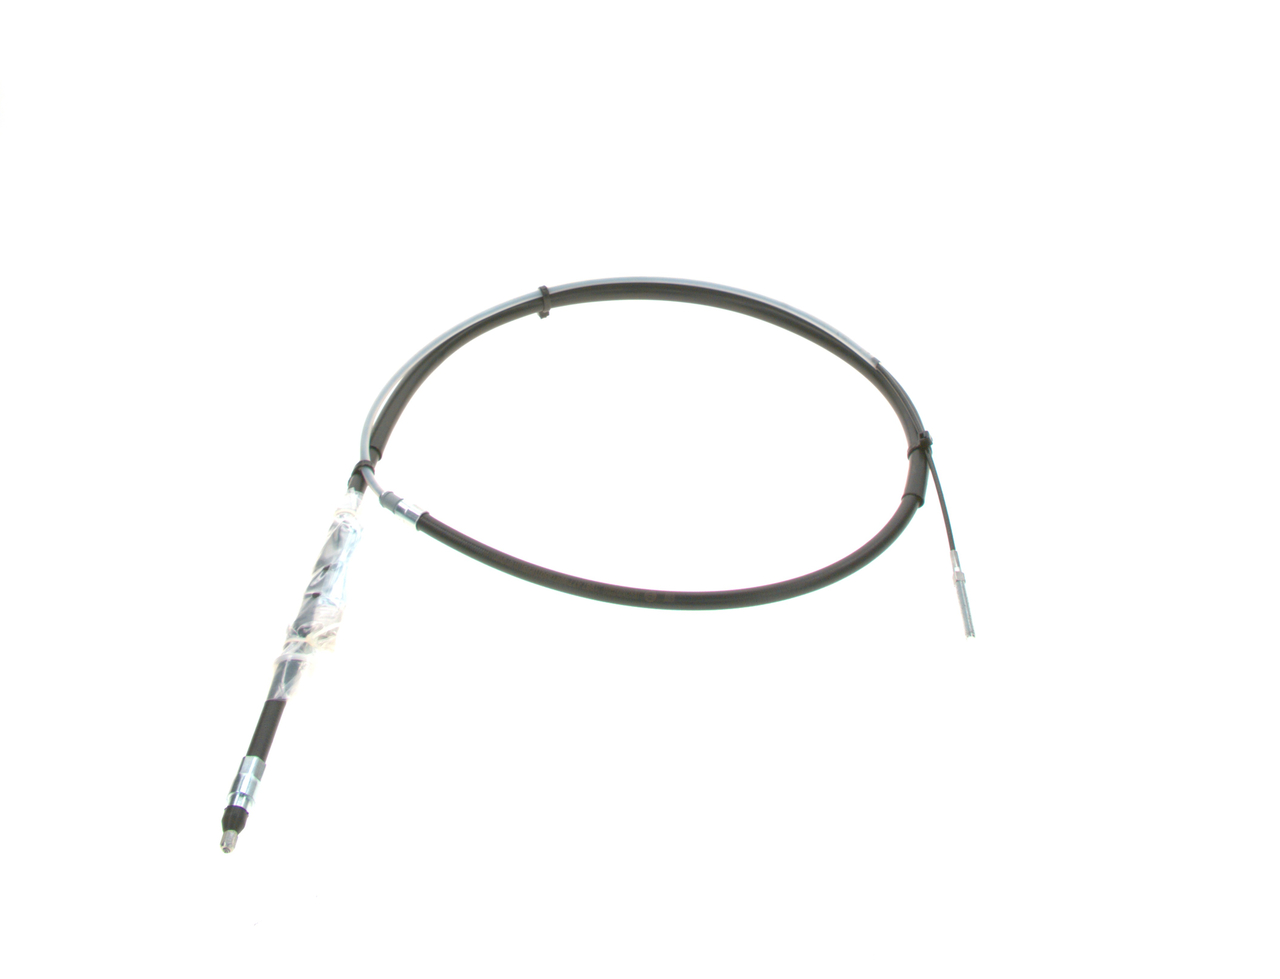 BOSCH 1 987 477 694 Hand brake cable 1877mm